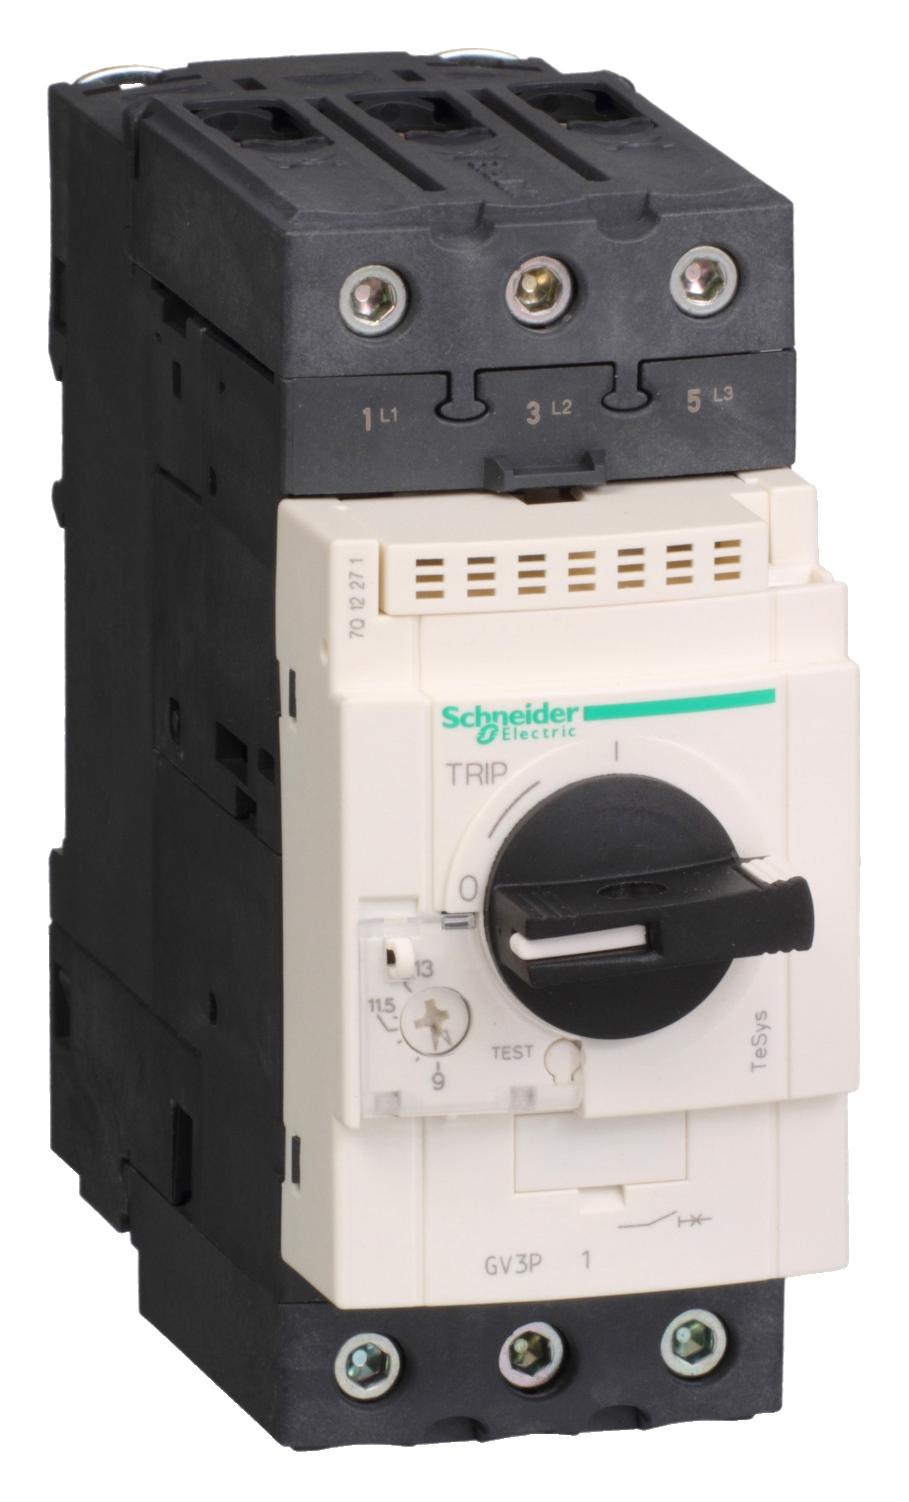 GV3P13 THERMAL MAGNETIC CIRCUIT BREAKER SCHNEIDER ELECTRIC